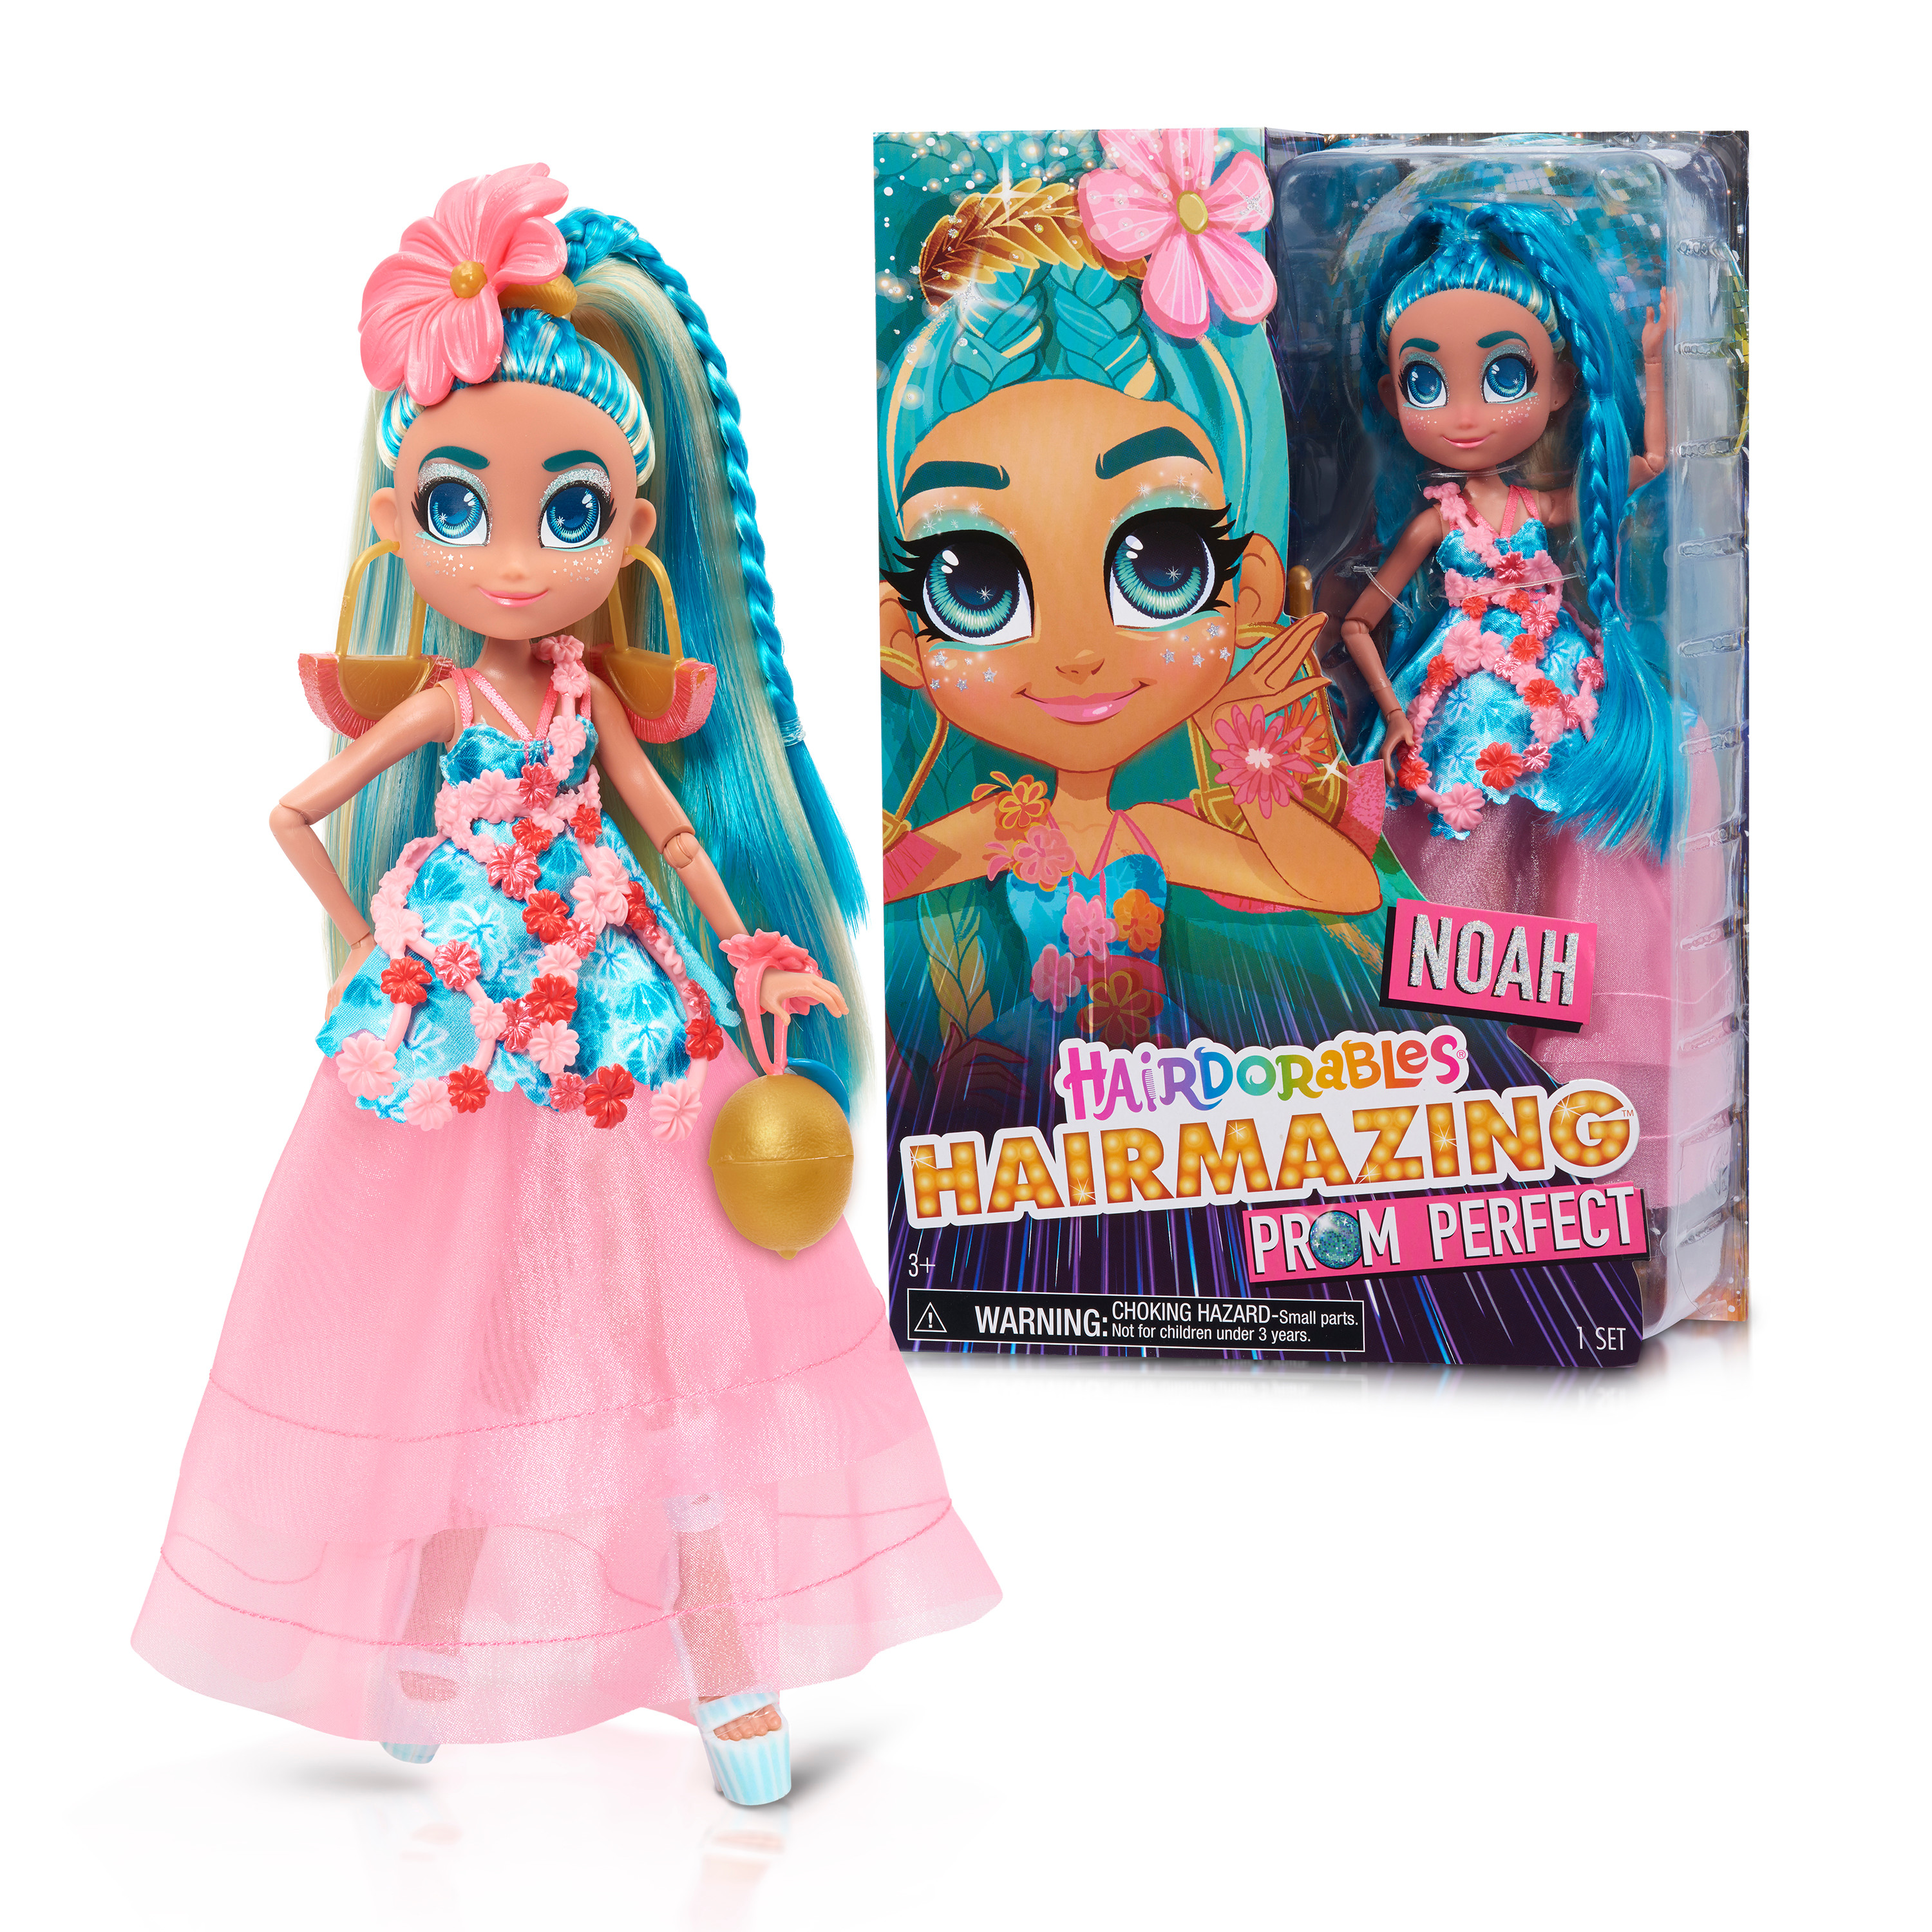 Hairdorables Hairmazing Prom Perfect Fashion Dolls, Noah, Blue and Blonde Hair,  Kids Toys for Ages 3 Up, Gifts and Presents - image 1 of 3